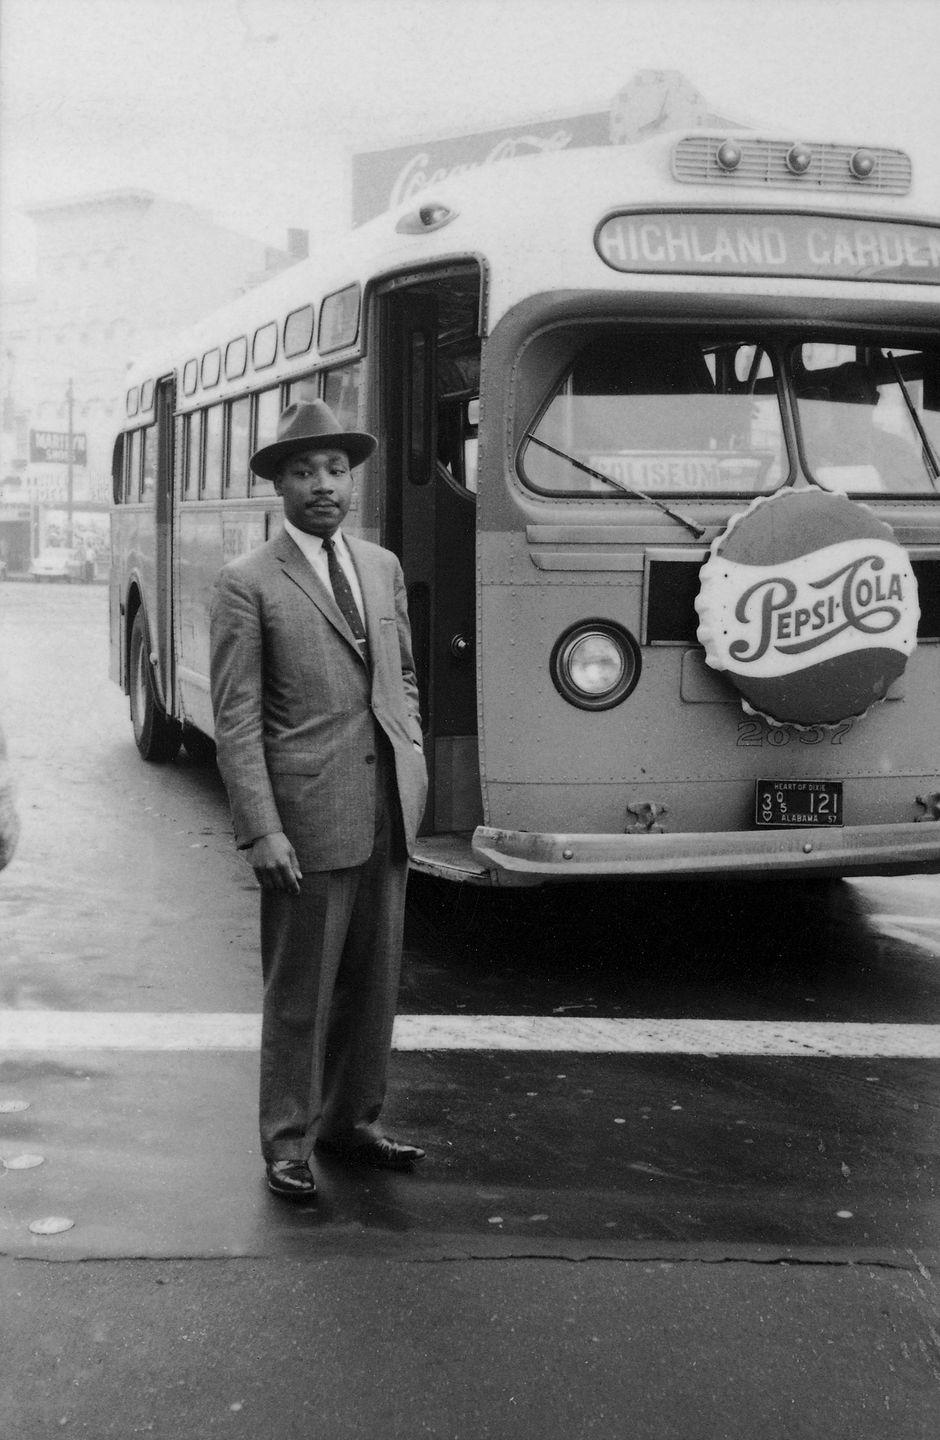 martin luther king jr stands outside in a suit and hat, behind him is a city bus with a pepsi cola ad on the front